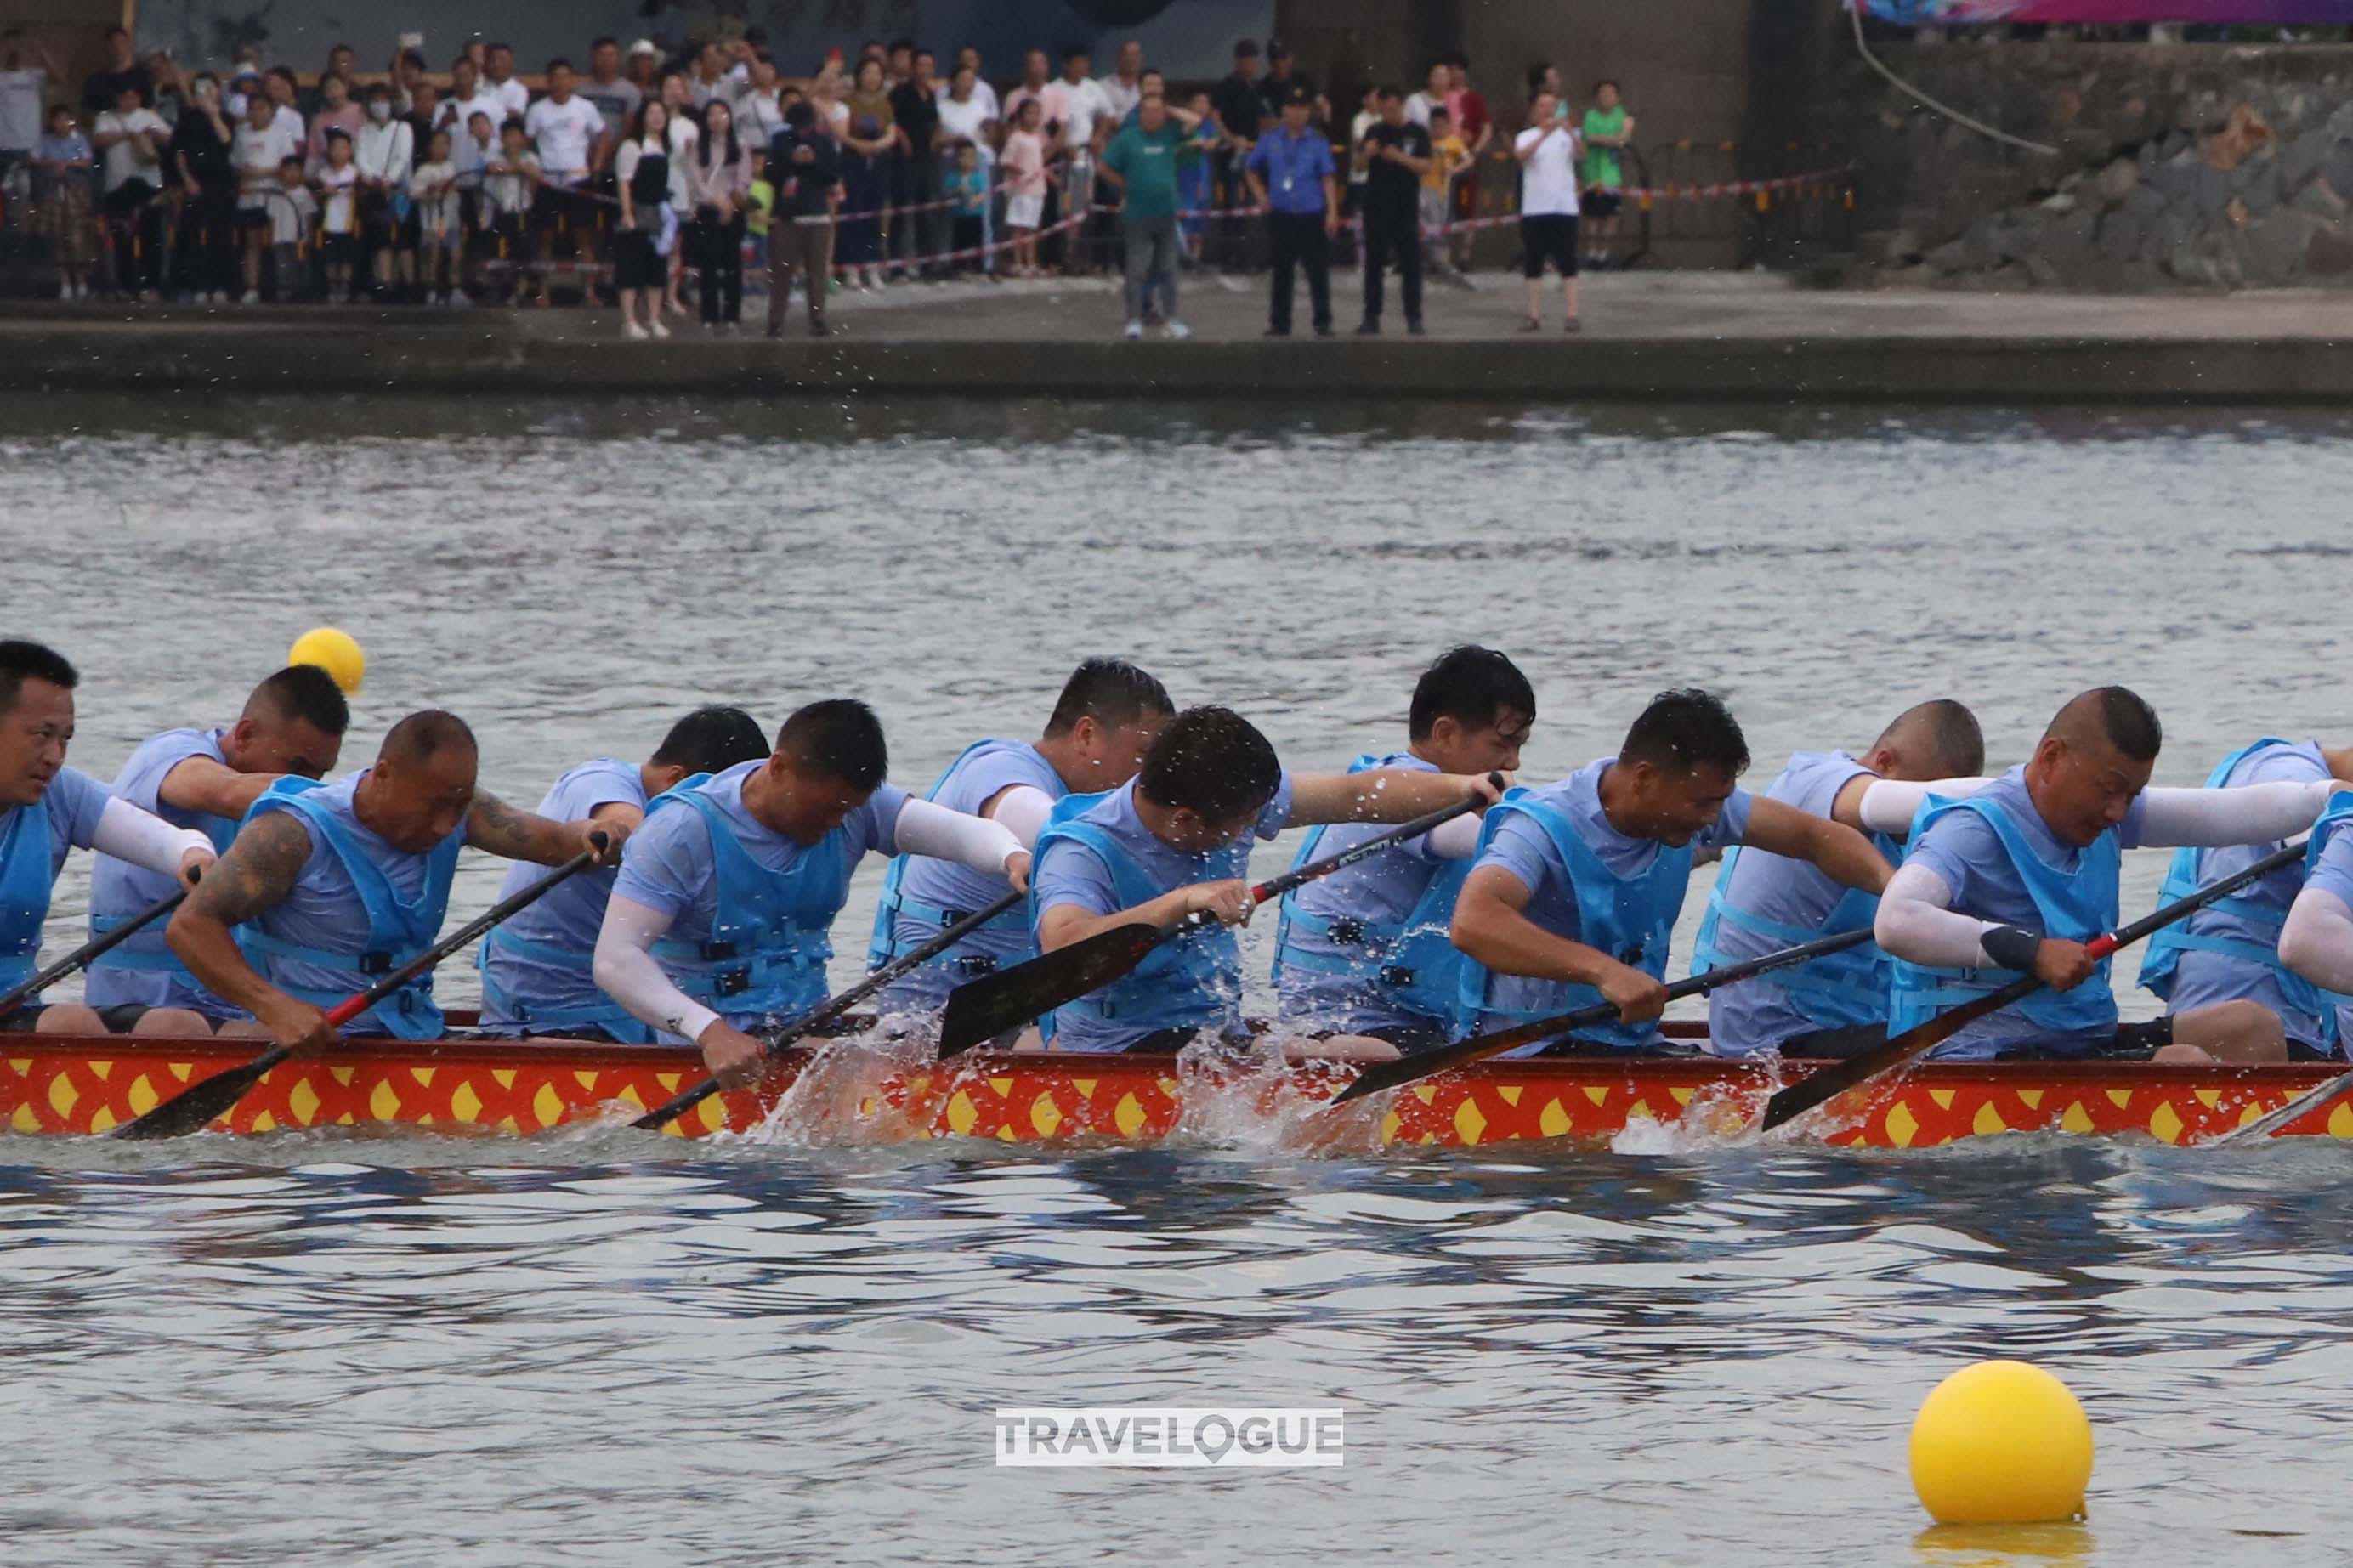 People attend a dragon boat race ahead of Dragon Boat Festival in Fuding, east China's Fujian Province, in this undated photo. /CGTN